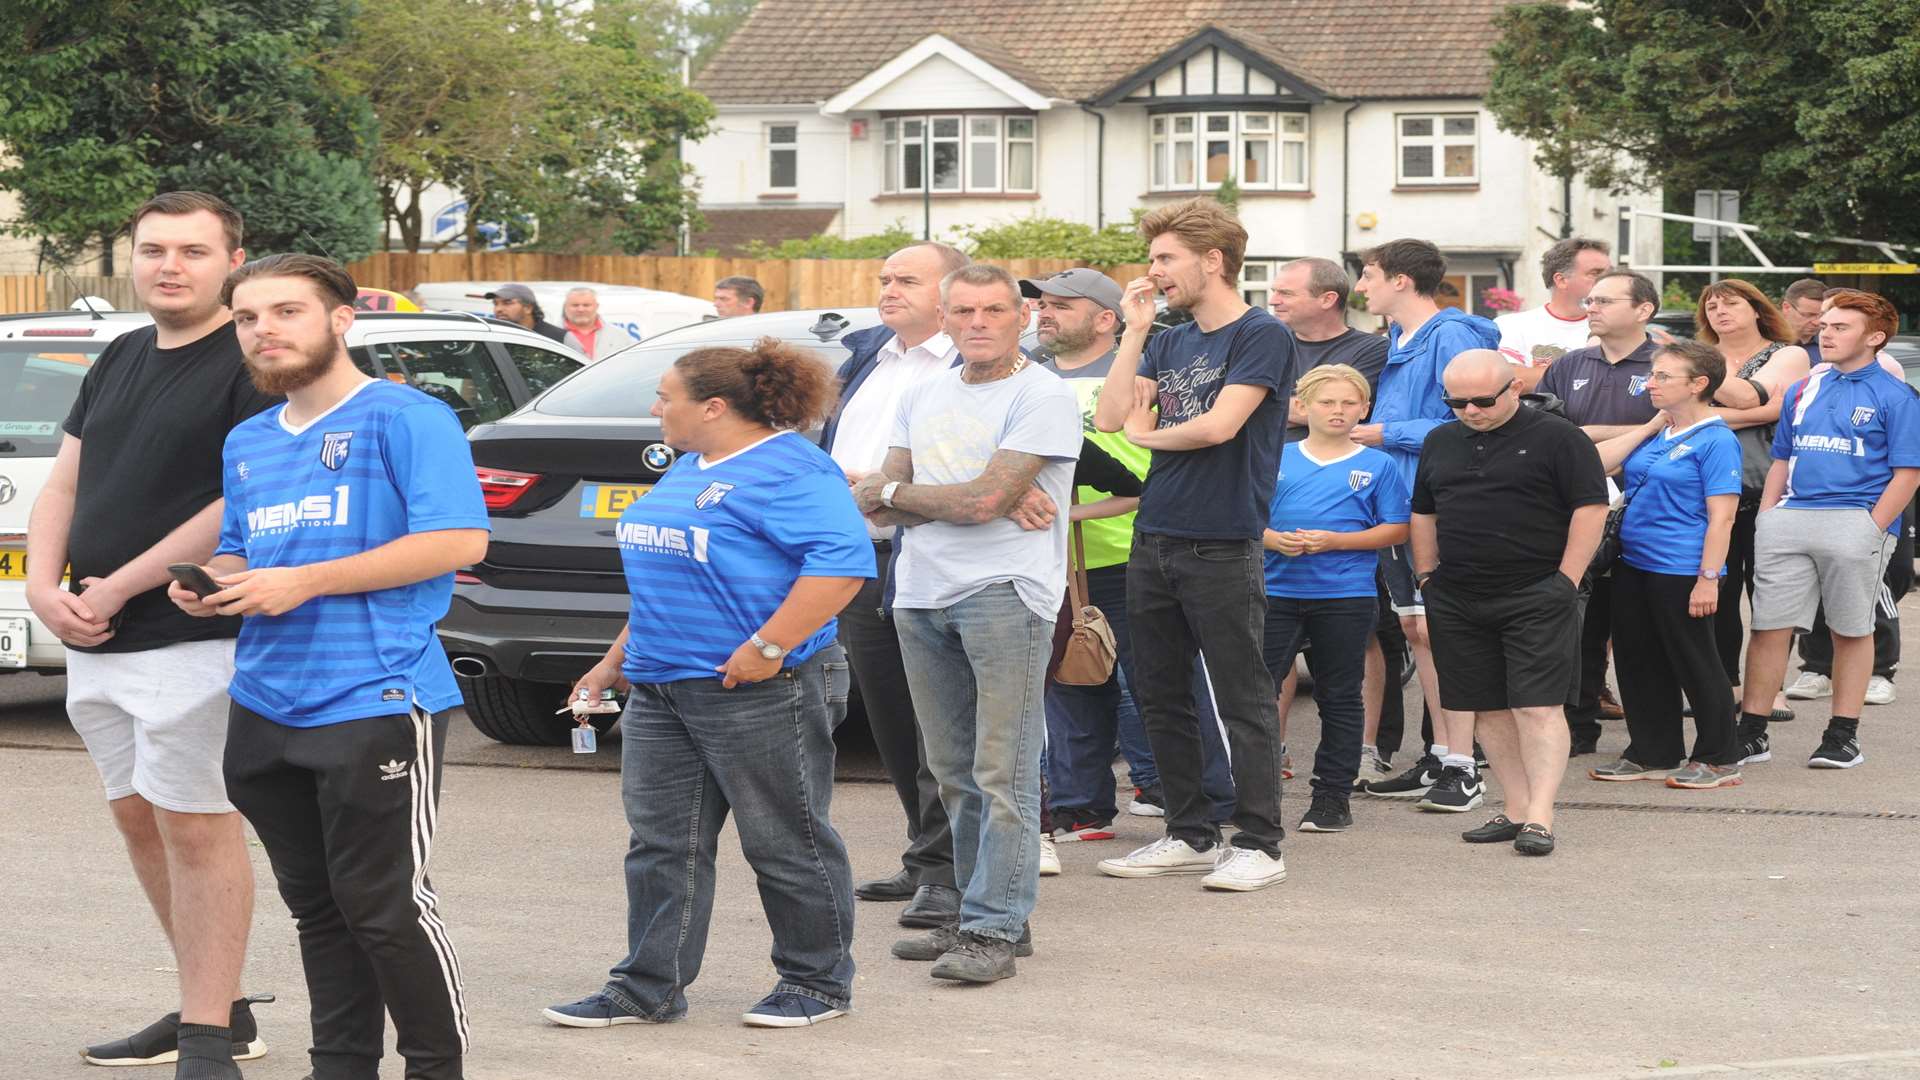 Fans queue outside the ground as the Gills take on Chatham in pre-season Picture: Steve Crispe